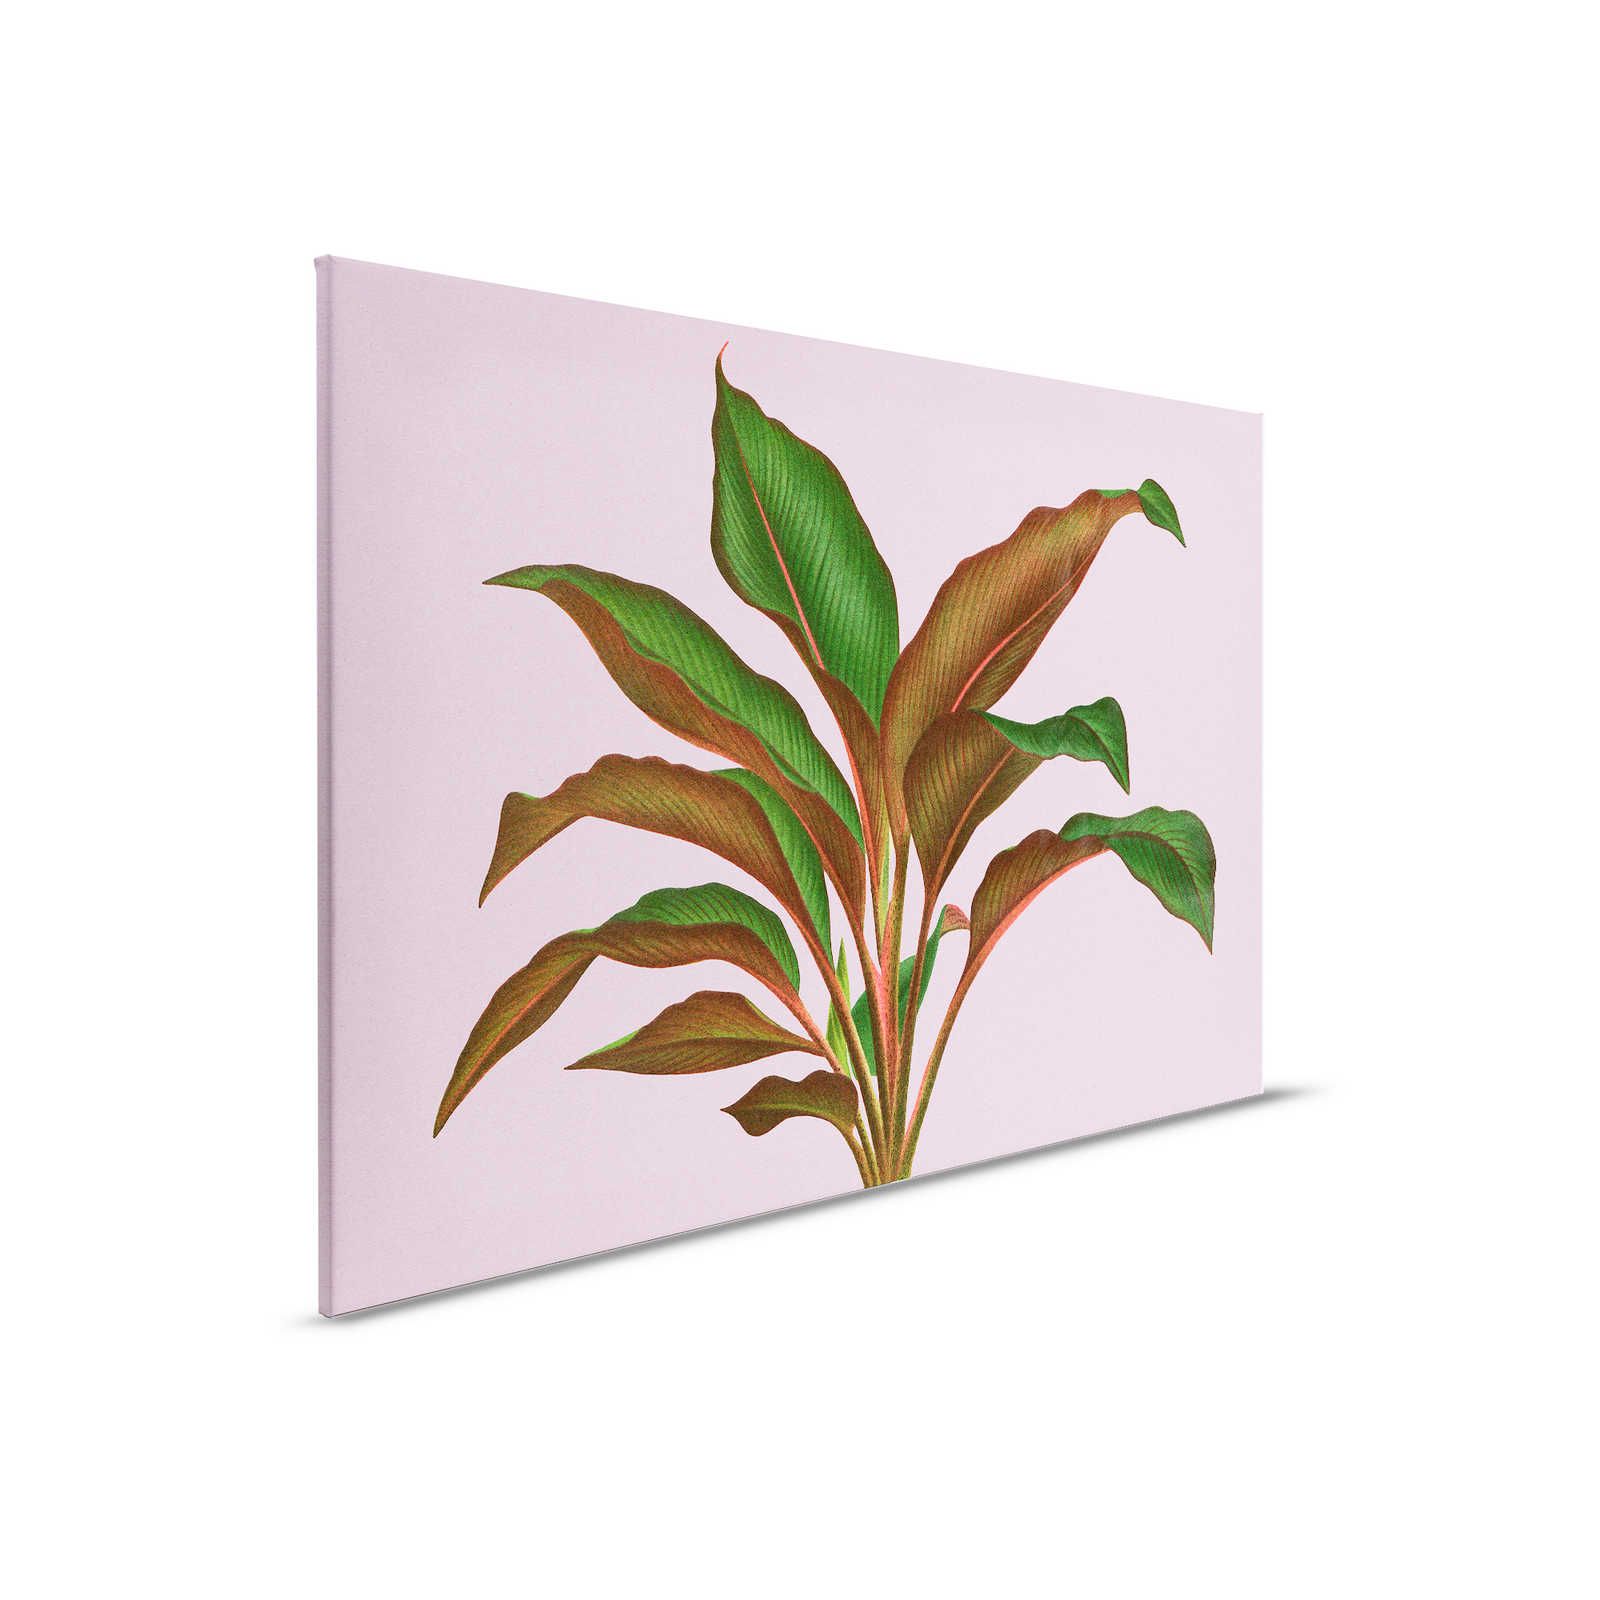 Leaf Garden 3 - Leaves Canvas painting Pink with tropical fern leaf - 0.90 m x 0.60 m
